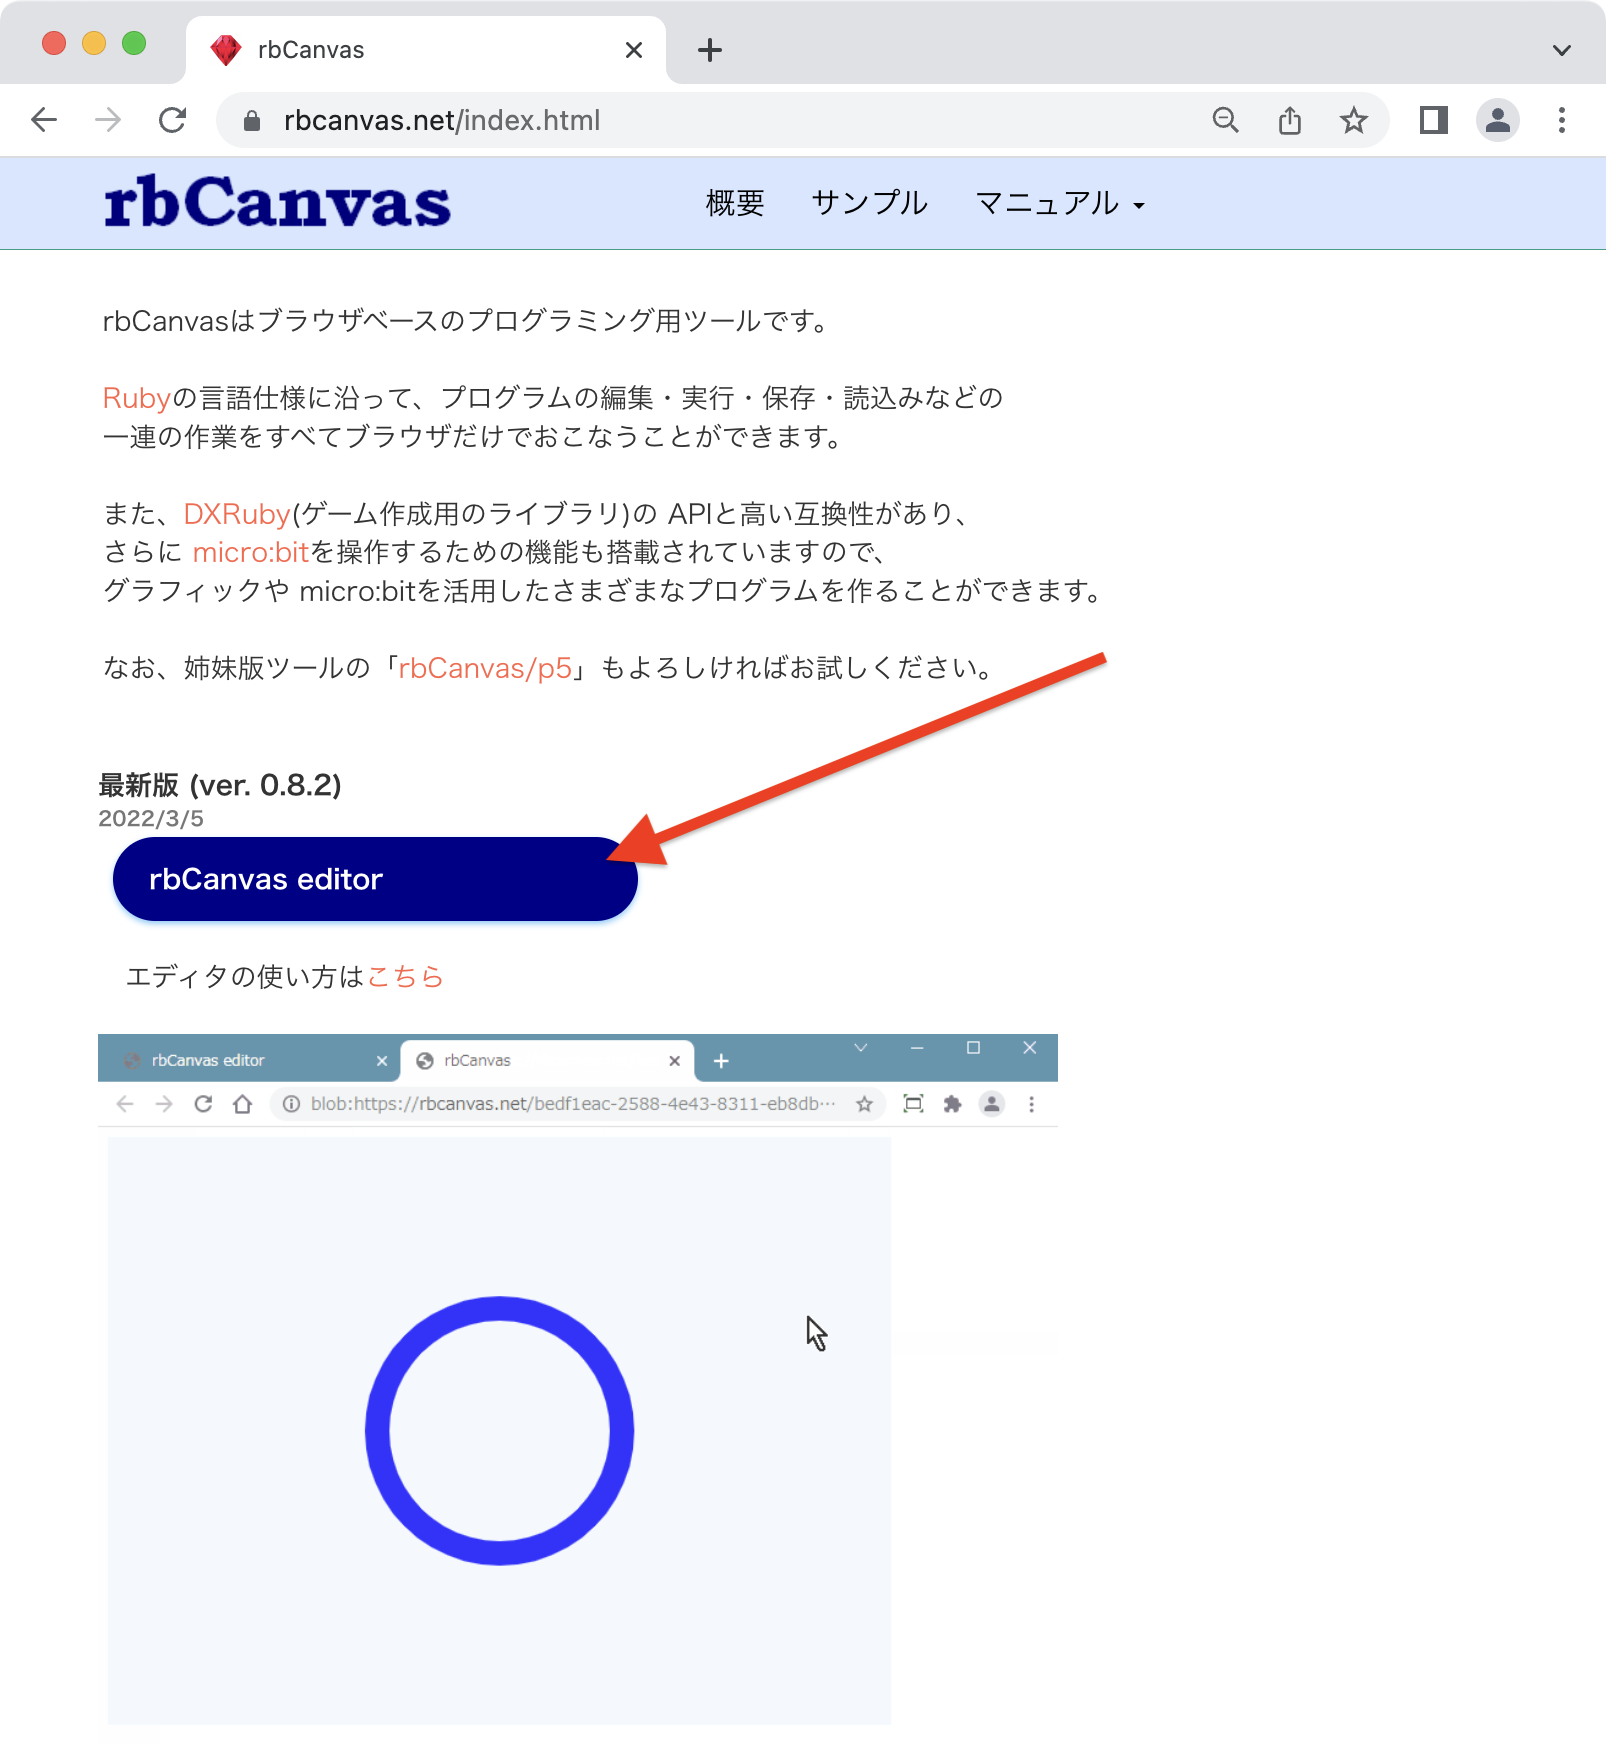 rbCanvas_公式HP.png